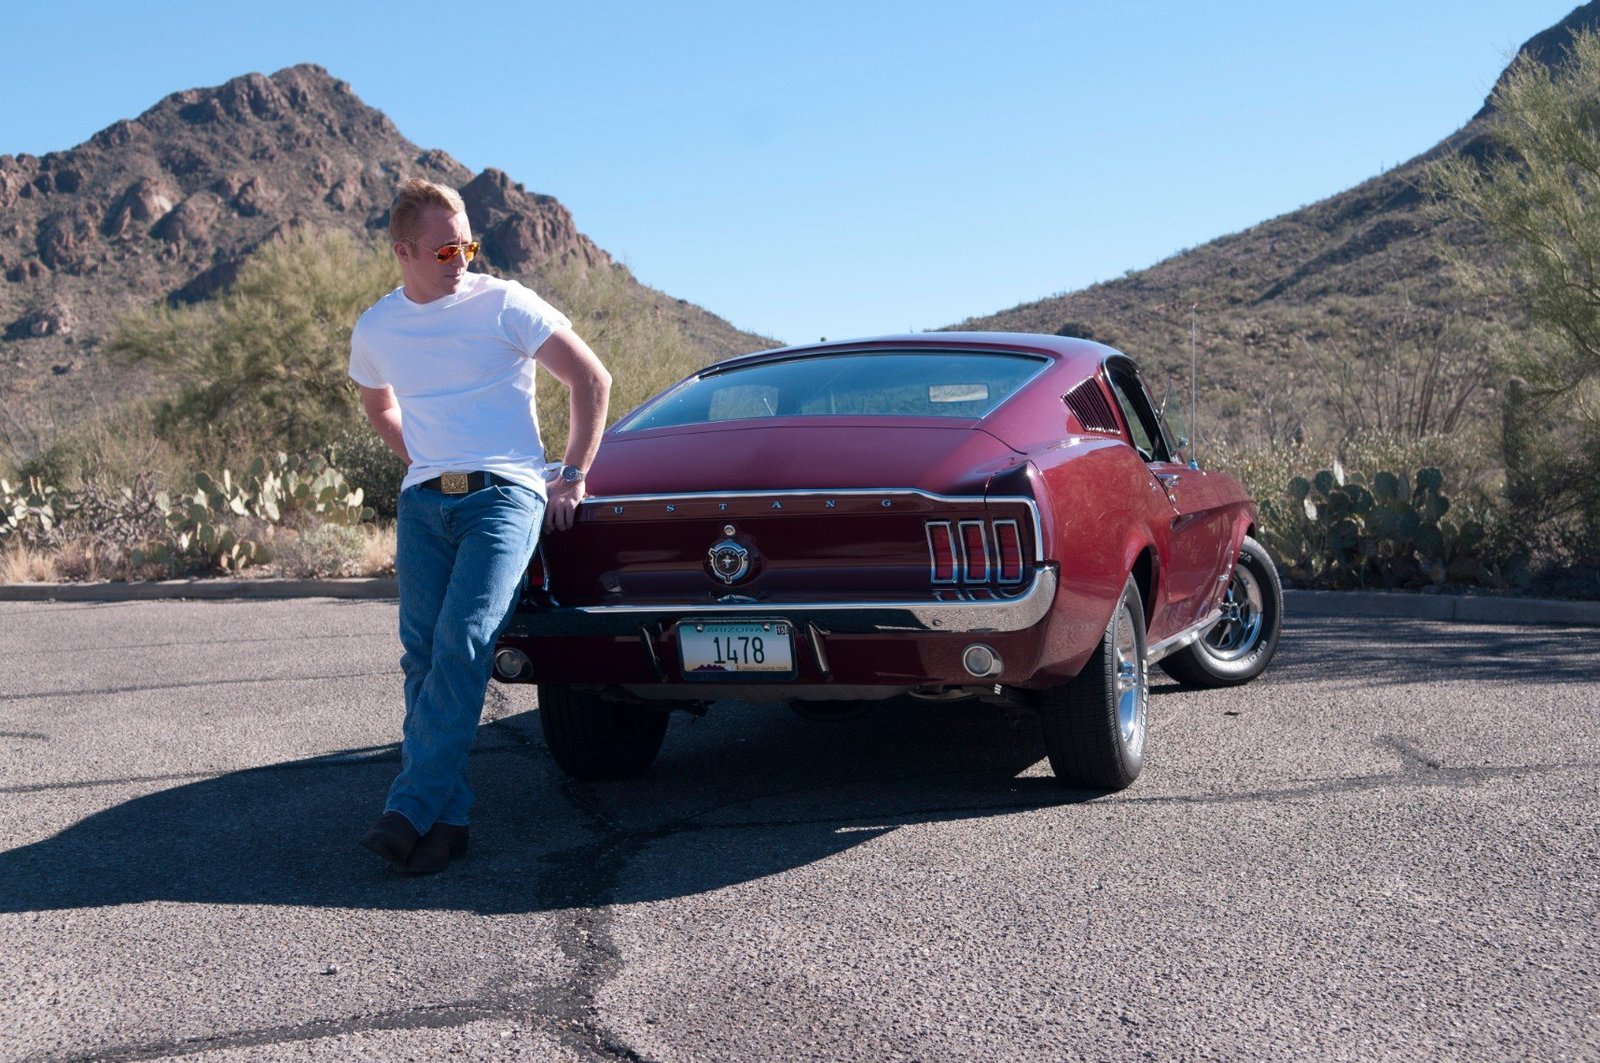 1967 Mustang fastback in the Mountains phoenix portraits